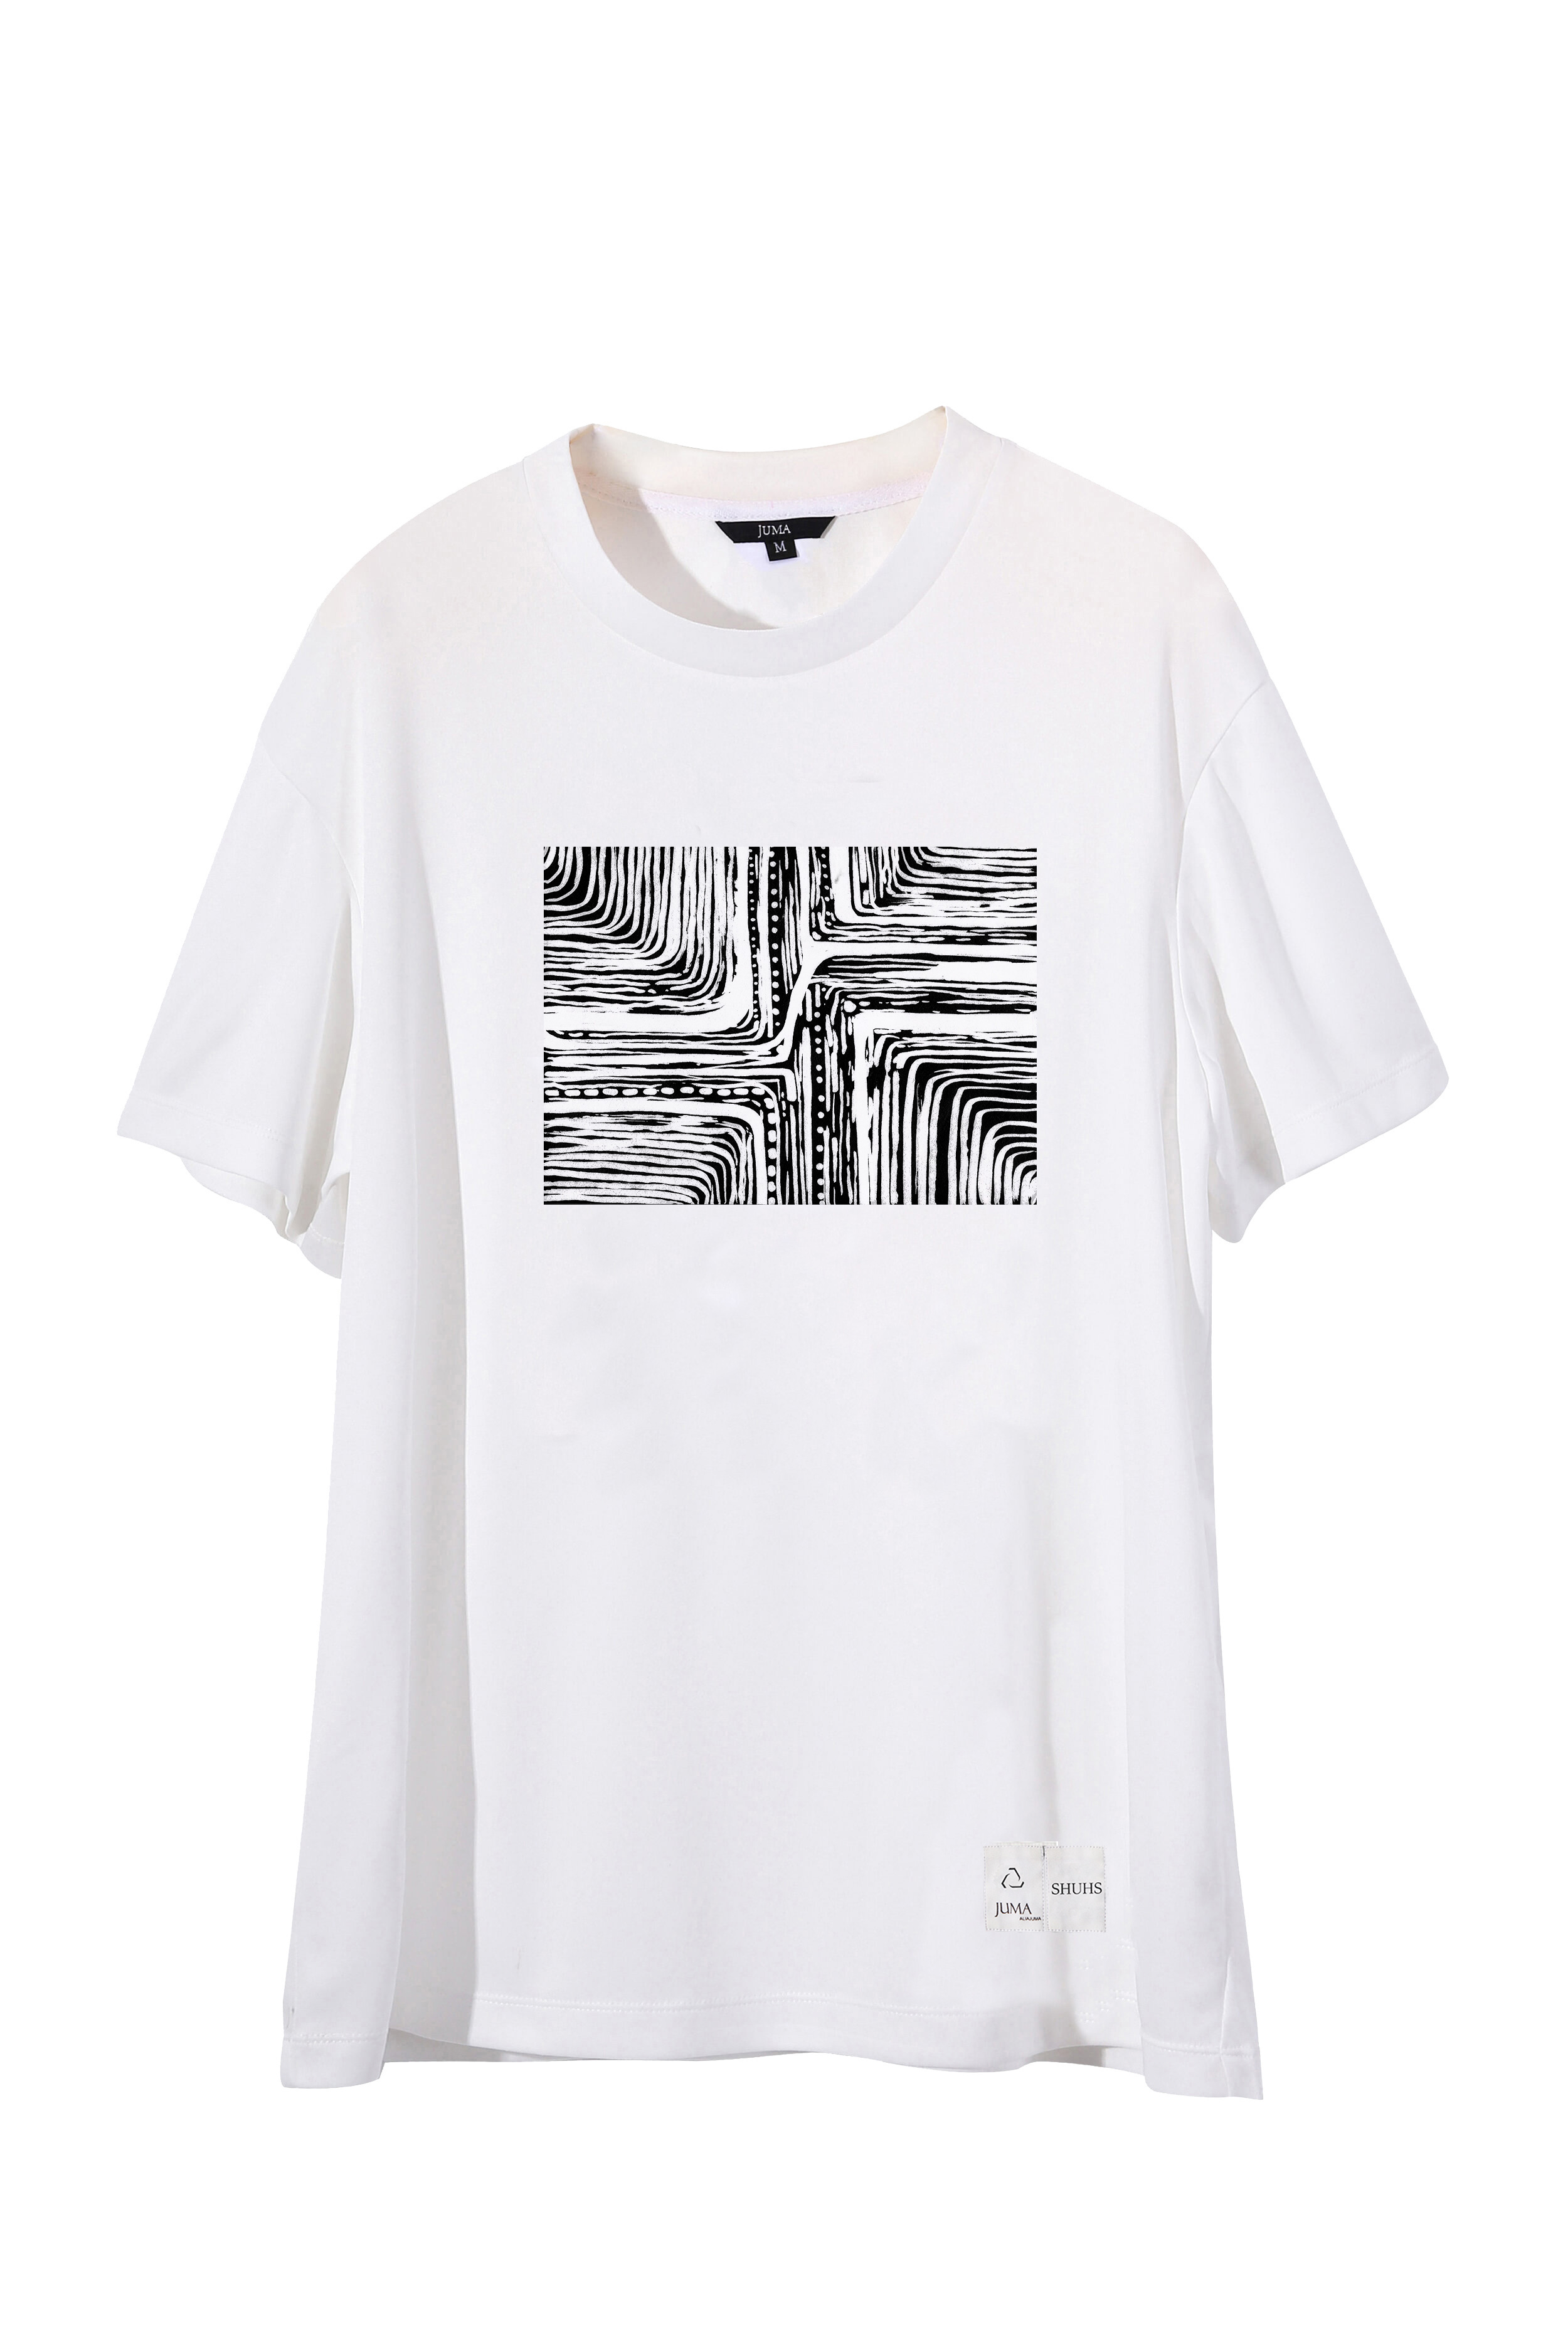 ACID 4 YUPPIE Vancouver Landing Rocky Mountain 印花 T 恤 - 4 个再生水瓶 - 白色｜ACID4YUPPIES Vancouver Landing Rocly Mountain Printed T-Shirt - 4 Recycled Water Bottles-WHITE